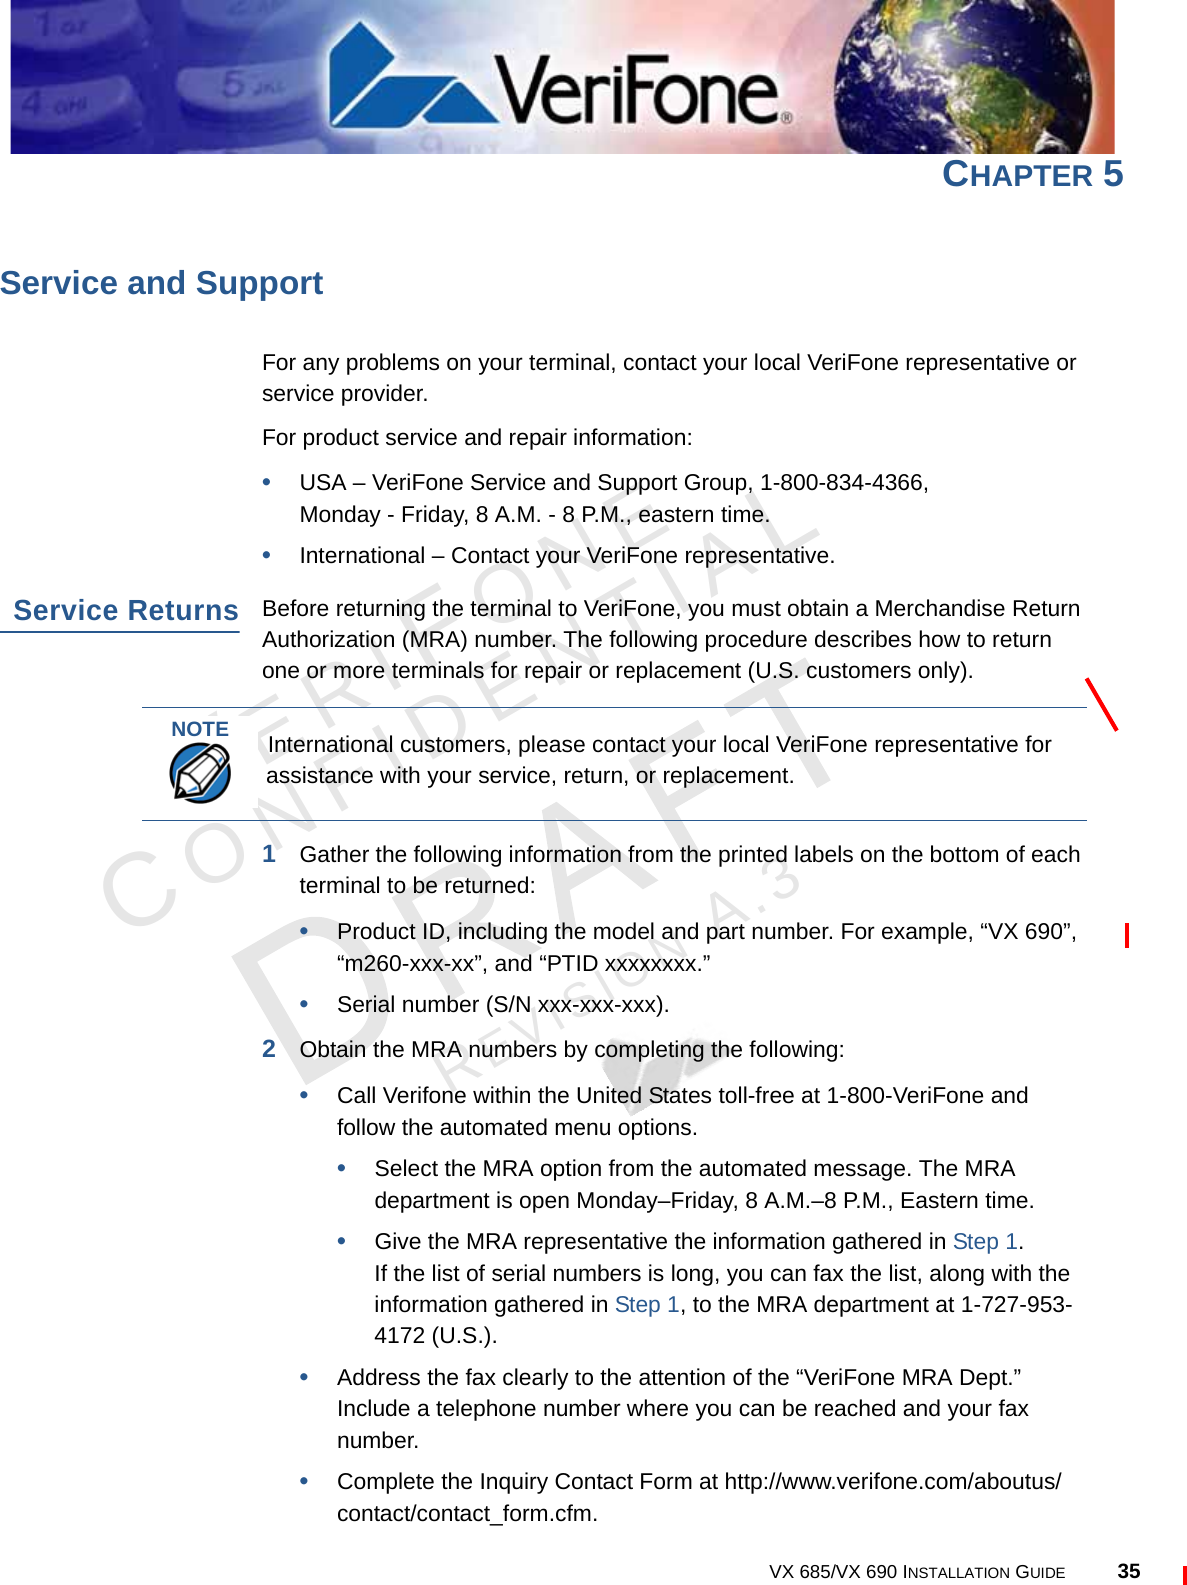 VERIFONECONFIDENTIALREVISION A.3 VX 685/VX 690 INSTALLATION GUIDE 35CHAPTER 5Service and SupportFor any problems on your terminal, contact your local VeriFone representative or service provider.For product service and repair information:•USA – VeriFone Service and Support Group, 1-800-834-4366, Monday - Friday, 8 A.M. - 8 P.M., eastern time.•International – Contact your VeriFone representative.Service ReturnsBefore returning the terminal to VeriFone, you must obtain a Merchandise Return Authorization (MRA) number. The following procedure describes how to return one or more terminals for repair or replacement (U.S. customers only).1Gather the following information from the printed labels on the bottom of each terminal to be returned:•Product ID, including the model and part number. For example, “VX 690”,“m260-xxx-xx”, and “PTID xxxxxxxx.”•Serial number (S/N xxx-xxx-xxx).2Obtain the MRA numbers by completing the following:•Call Verifone within the United States toll-free at 1-800-VeriFone and follow the automated menu options.•Select the MRA option from the automated message. The MRA department is open Monday–Friday, 8 A.M.–8 P.M., Eastern time.•Give the MRA representative the information gathered in Step 1.If the list of serial numbers is long, you can fax the list, along with the information gathered in Step 1, to the MRA department at 1-727-953-4172 (U.S.).•Address the fax clearly to the attention of the “VeriFone MRA Dept.” Include a telephone number where you can be reached and your fax number.•Complete the Inquiry Contact Form at http://www.verifone.com/aboutus/contact/contact_form.cfm.NOTEInternational customers, please contact your local VeriFone representative for assistance with your service, return, or replacement.